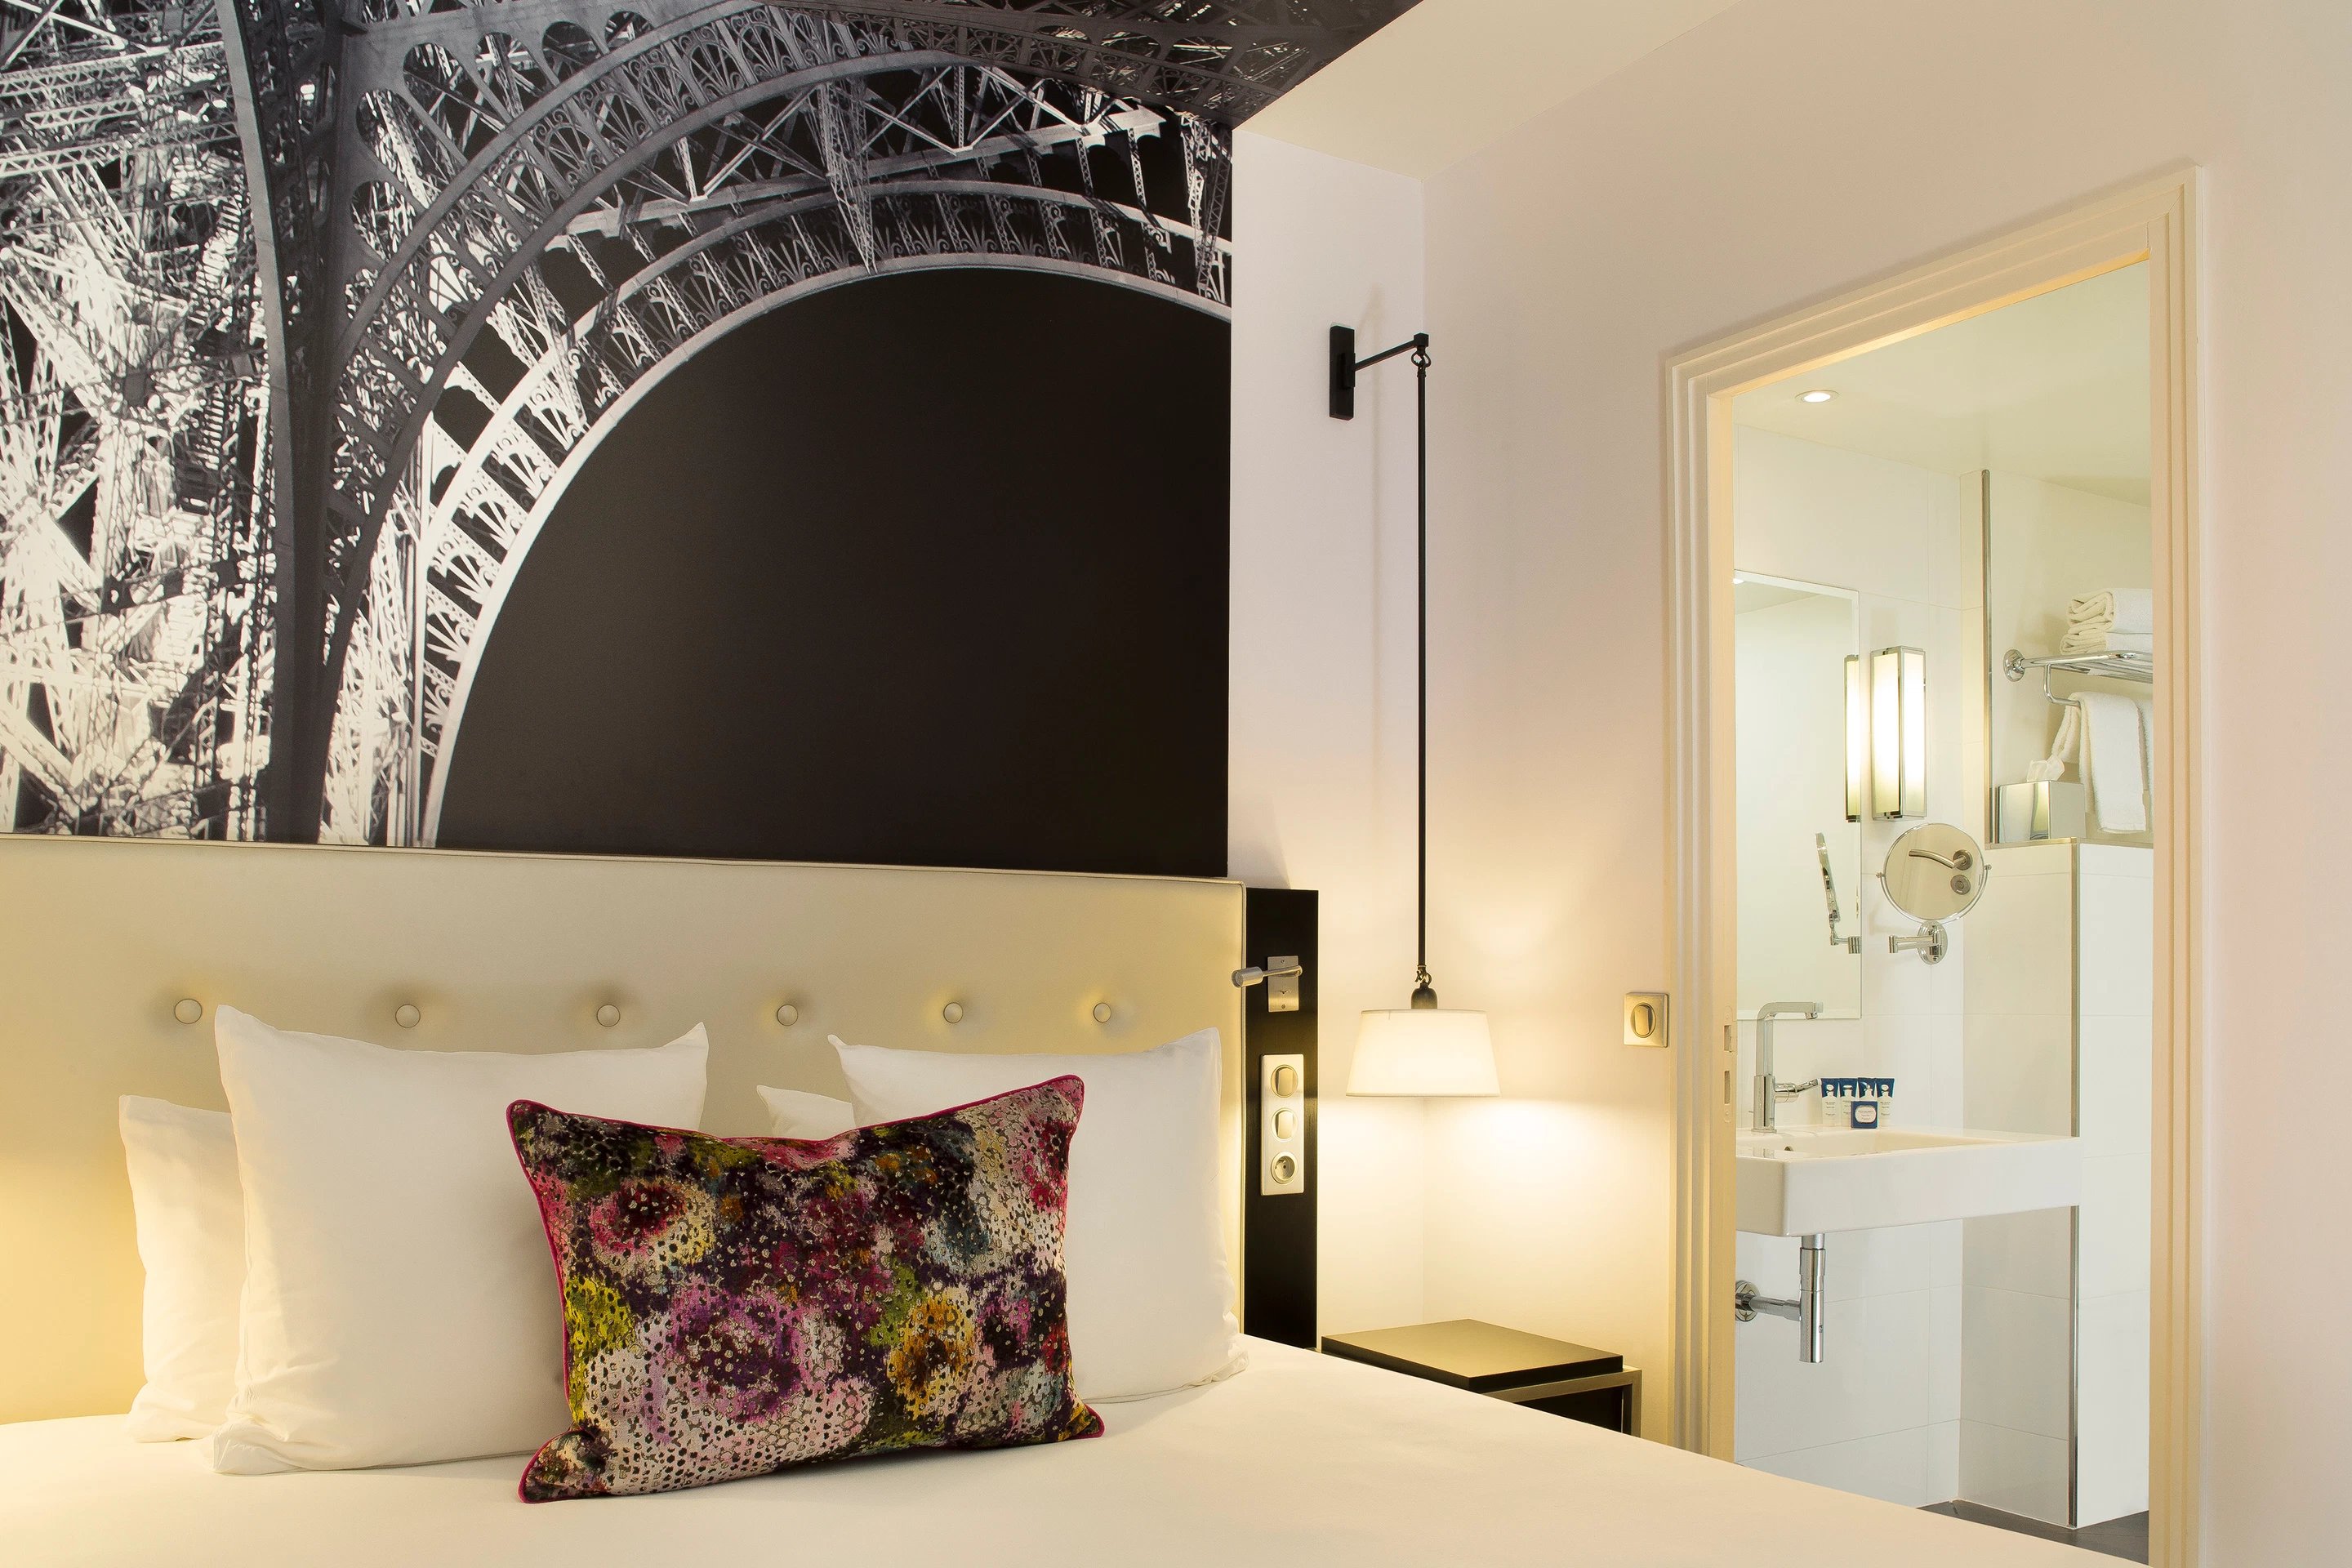 723/Gustave/chambre_/Cls/HOTEL_GUSTAVE_-_Classique_-_14.jpg